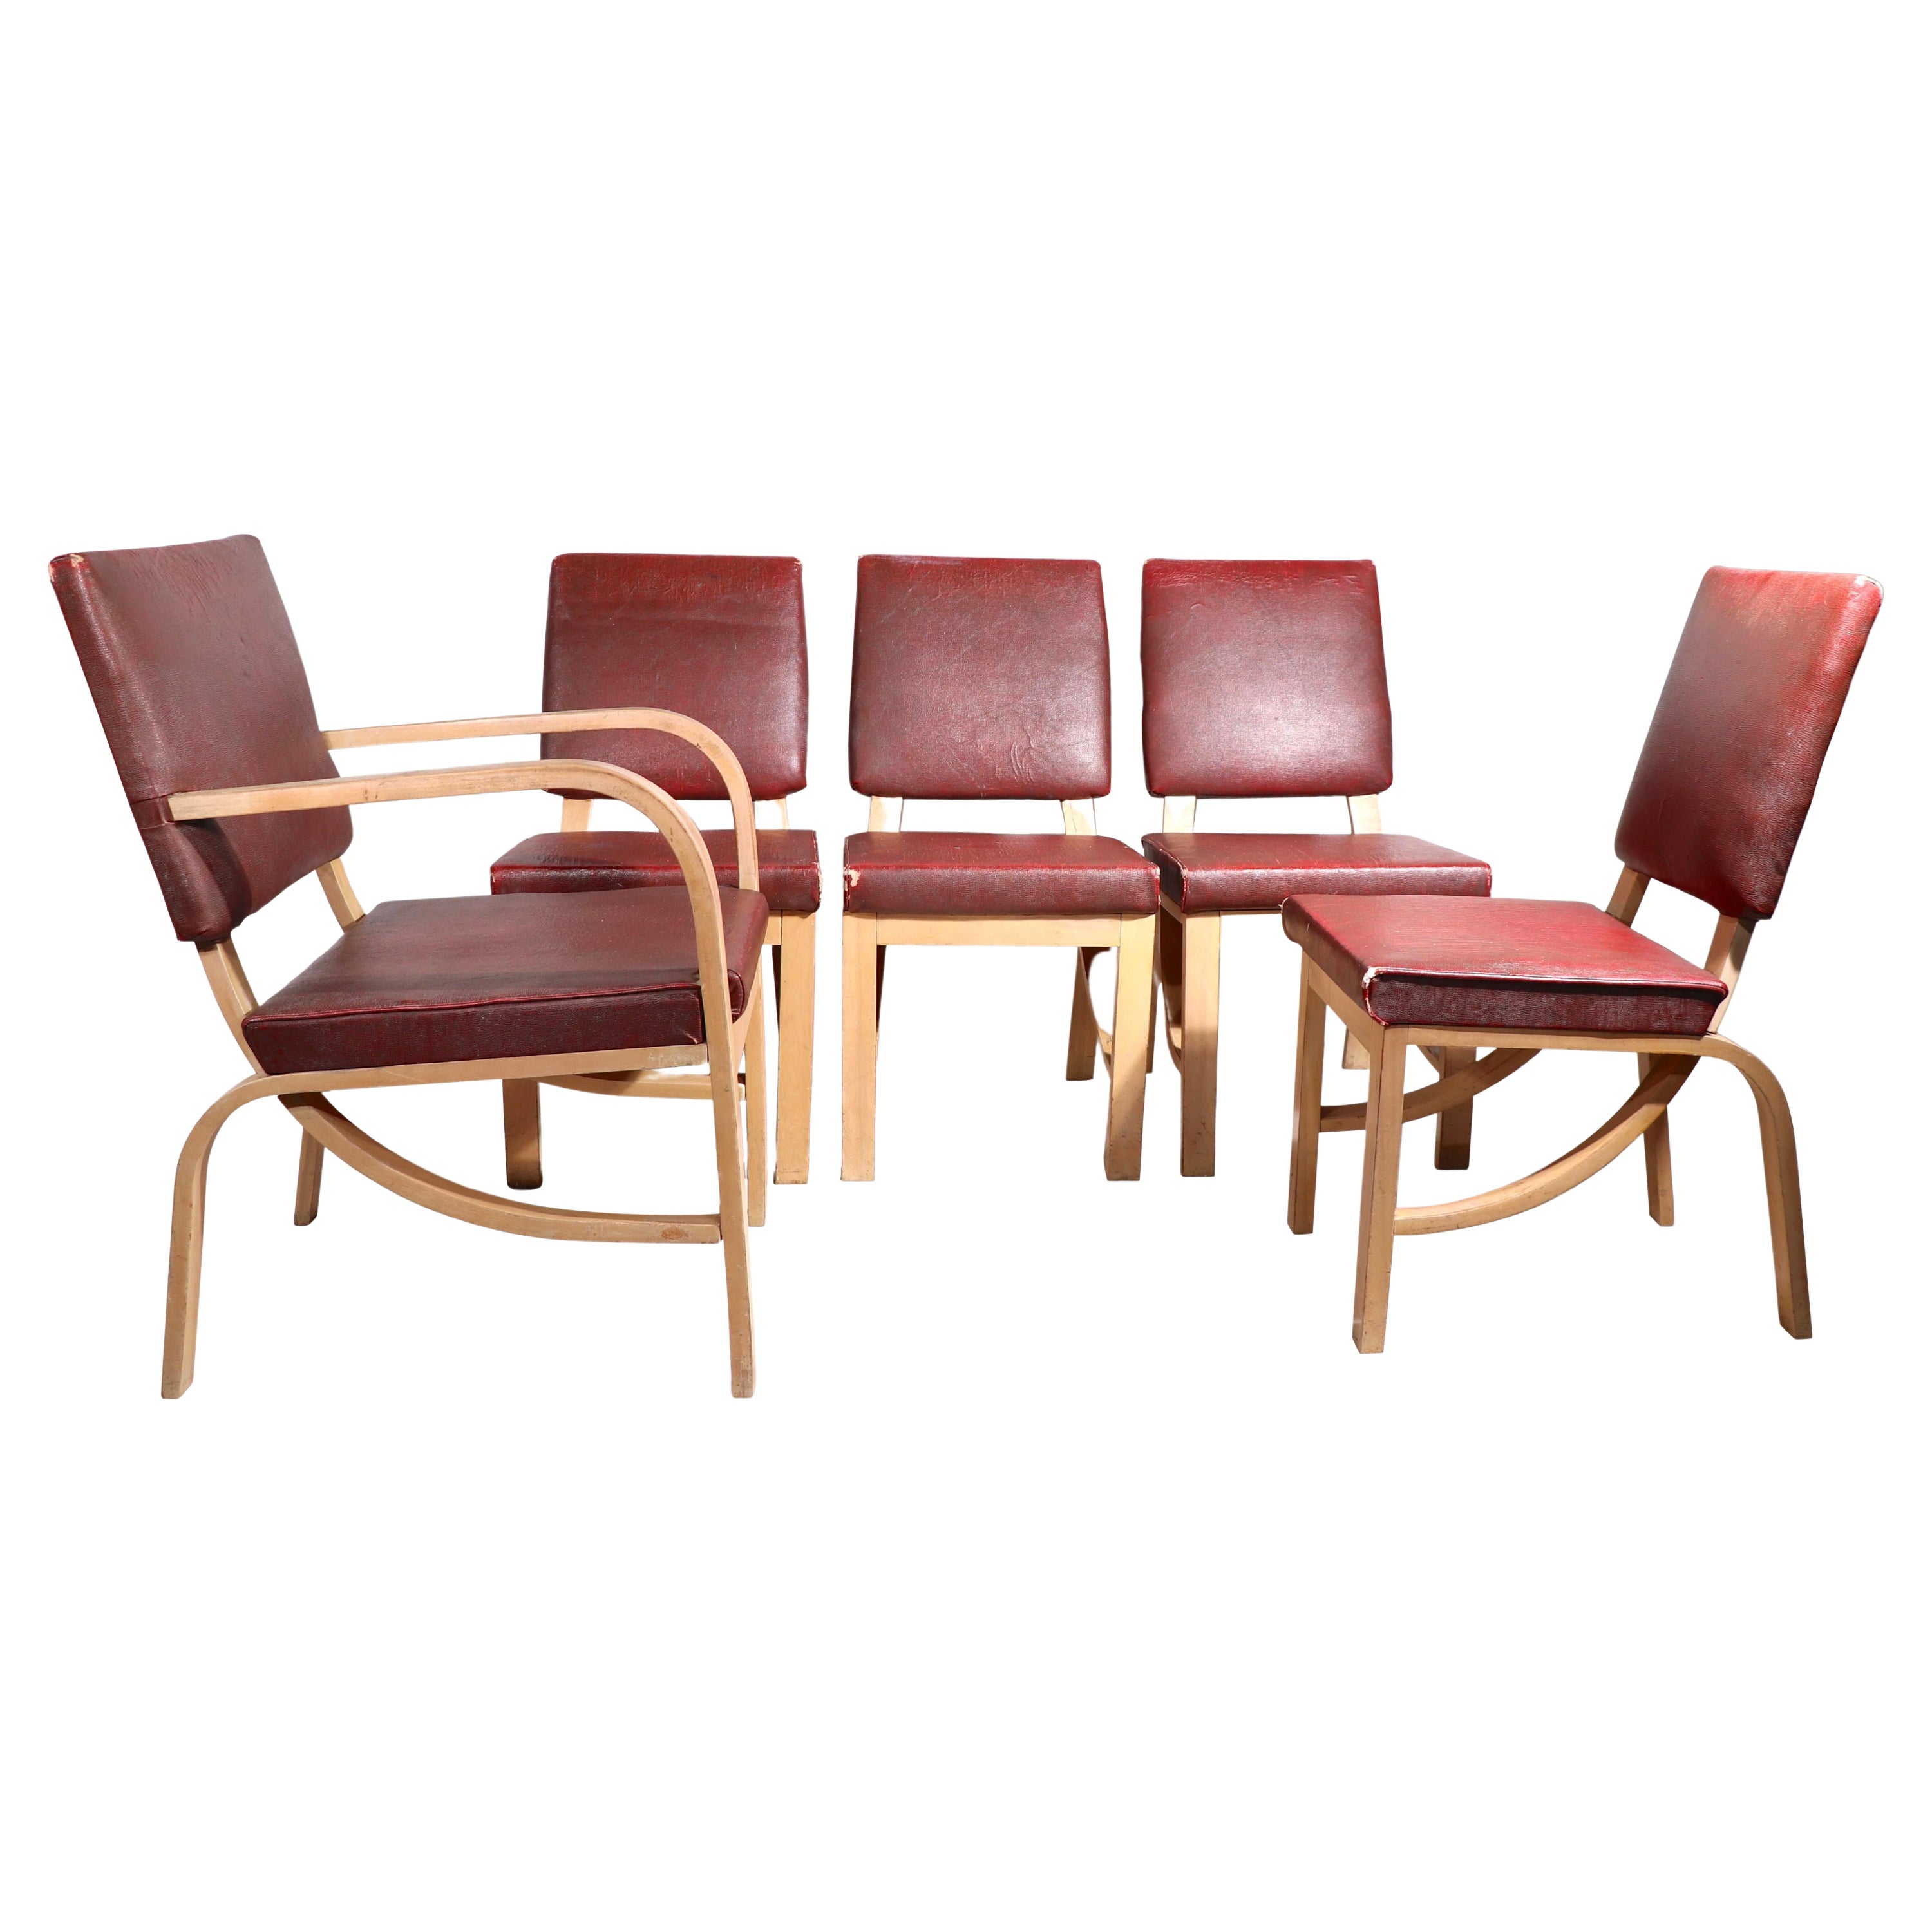 Set of 5 Rohde for Heywood Wakefield Dining Chairs